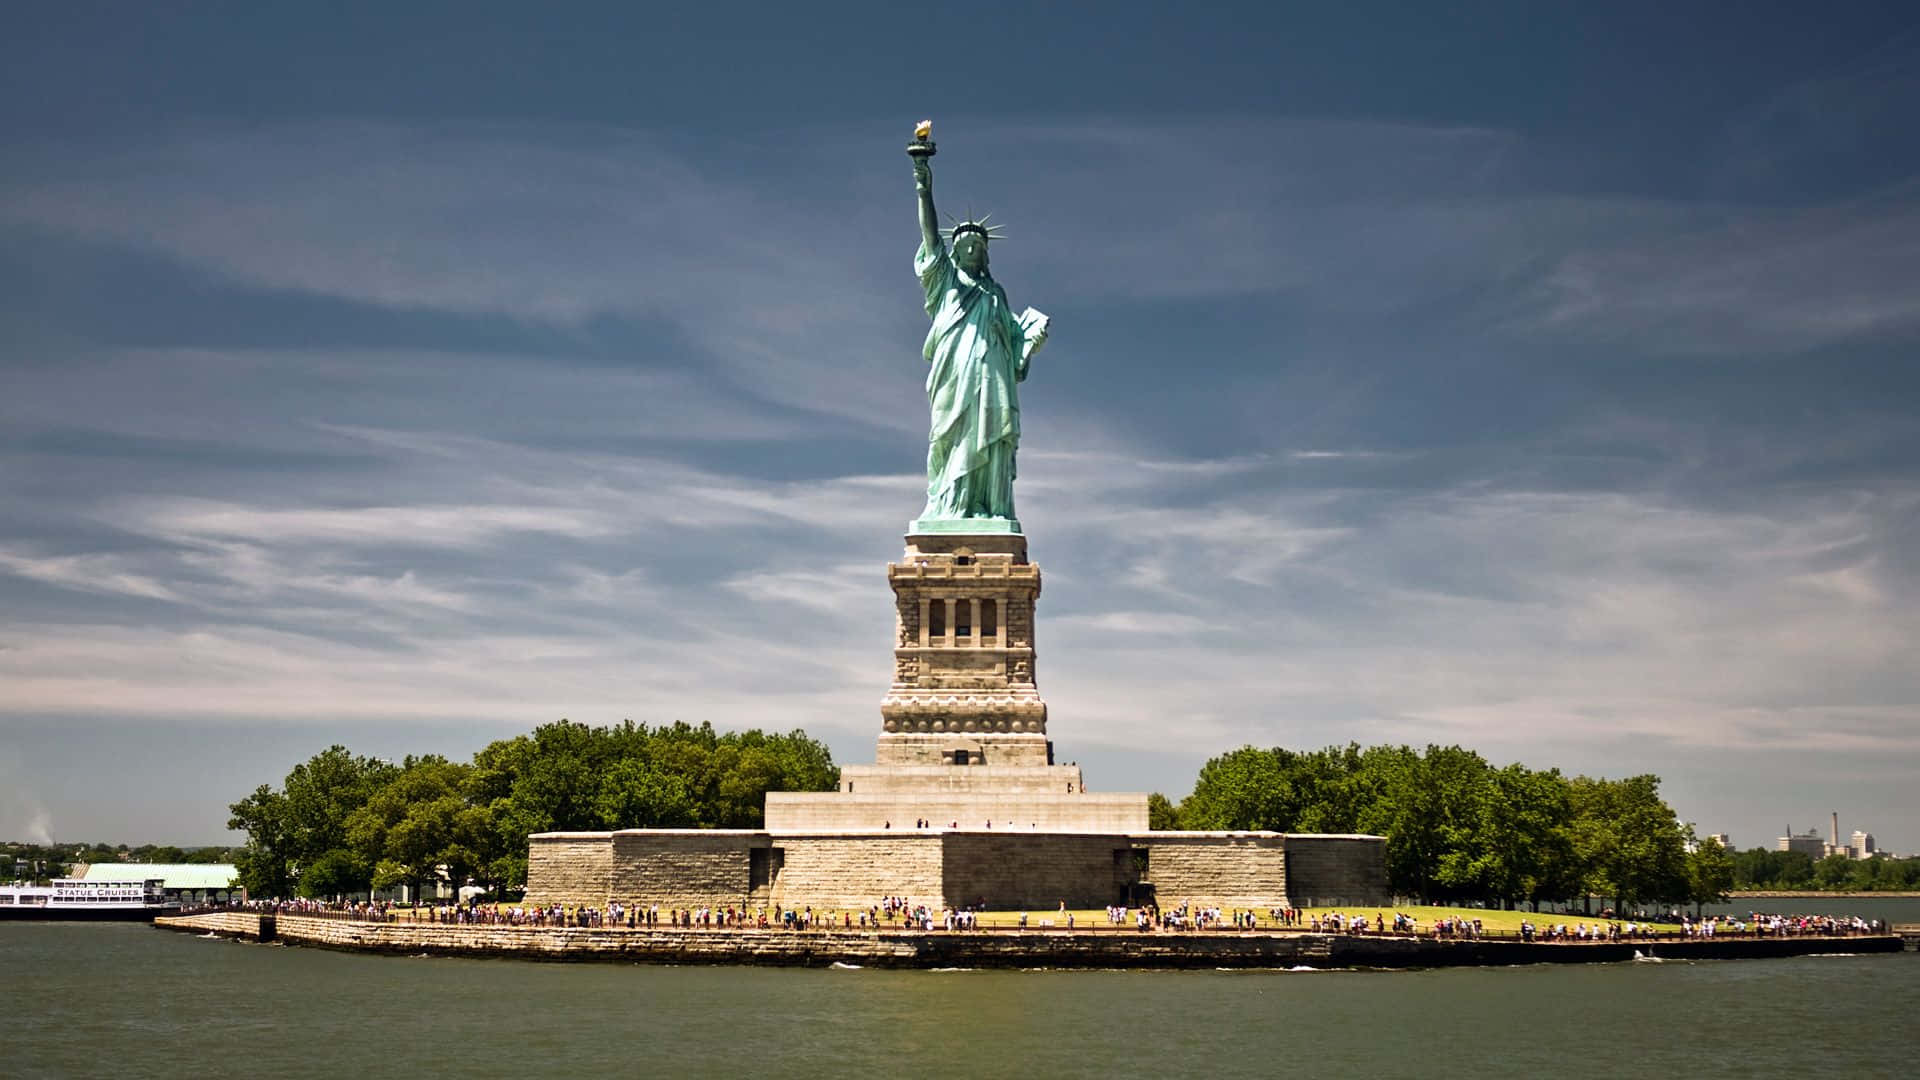 The iconic Statue of Liberty stands tall in New York City.